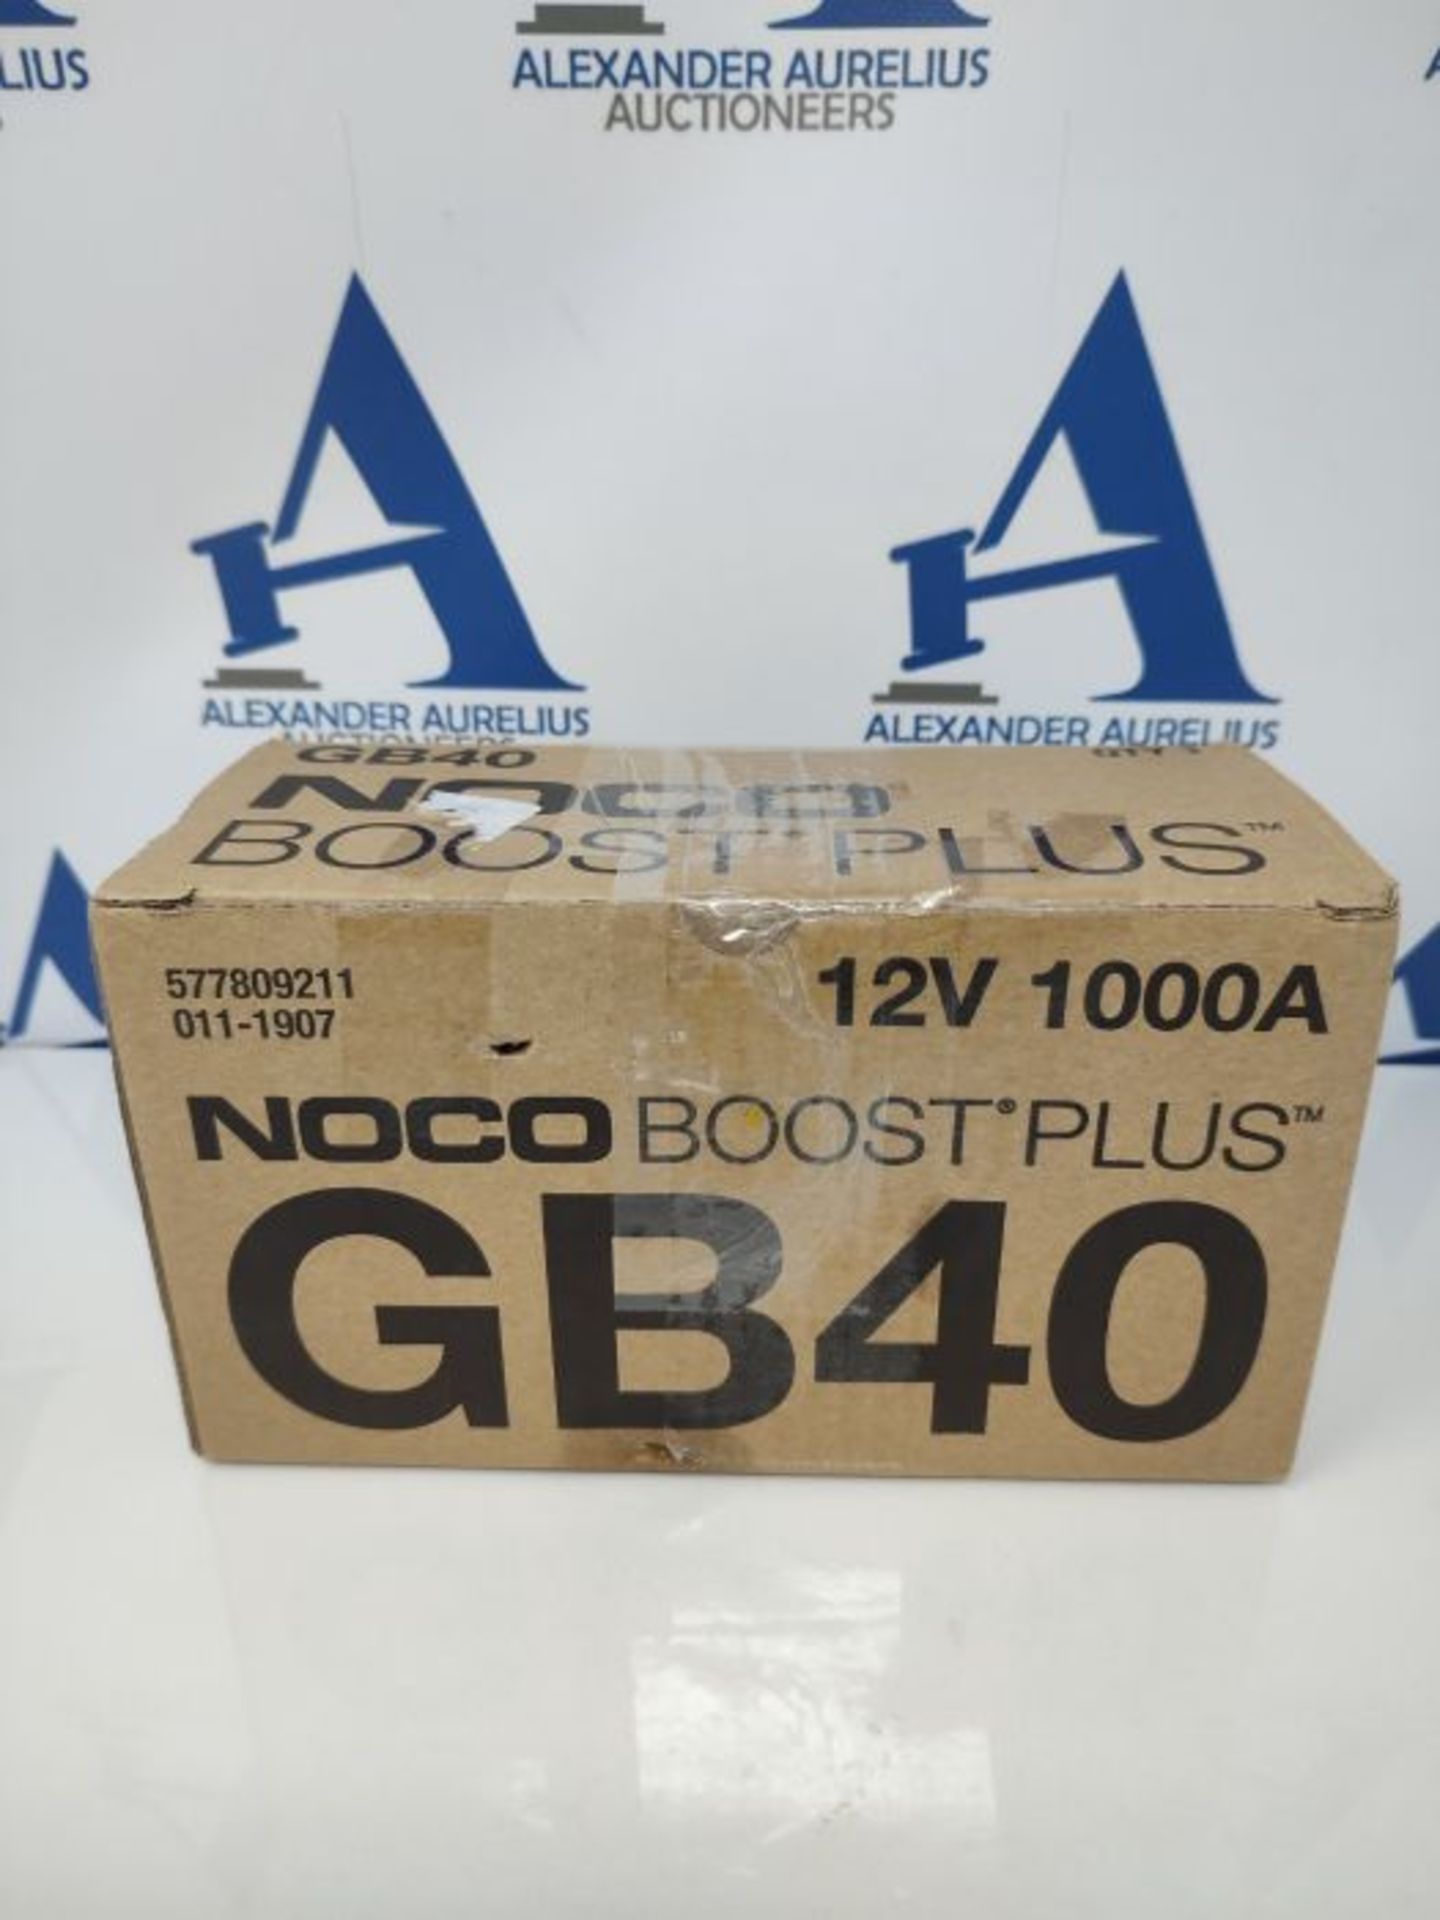 RRP £114.00 NOCO Boost Plus GB40 1000A 12V UltraSafe Portable Lithium Jump Starter, Car Battery Bo - Image 2 of 3